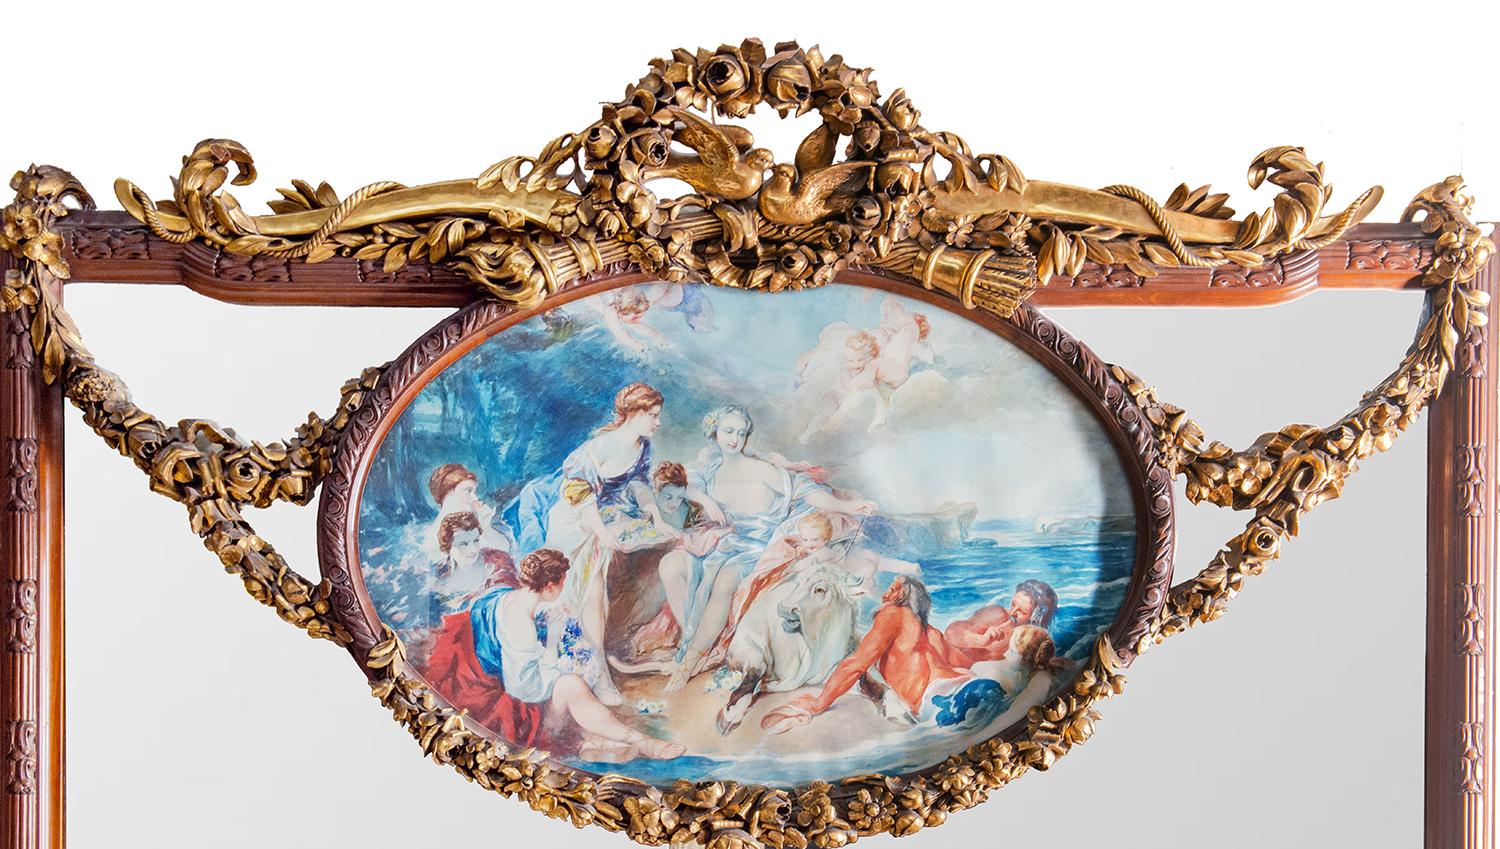 A monumental classical wall mirror, having classical carved foliage, ribbons, birds and a bow and arrows, surrounding a water colour painting depicting 'The Rape of Europa'. The carved mahogany surround frame with reeded and motif decoration.